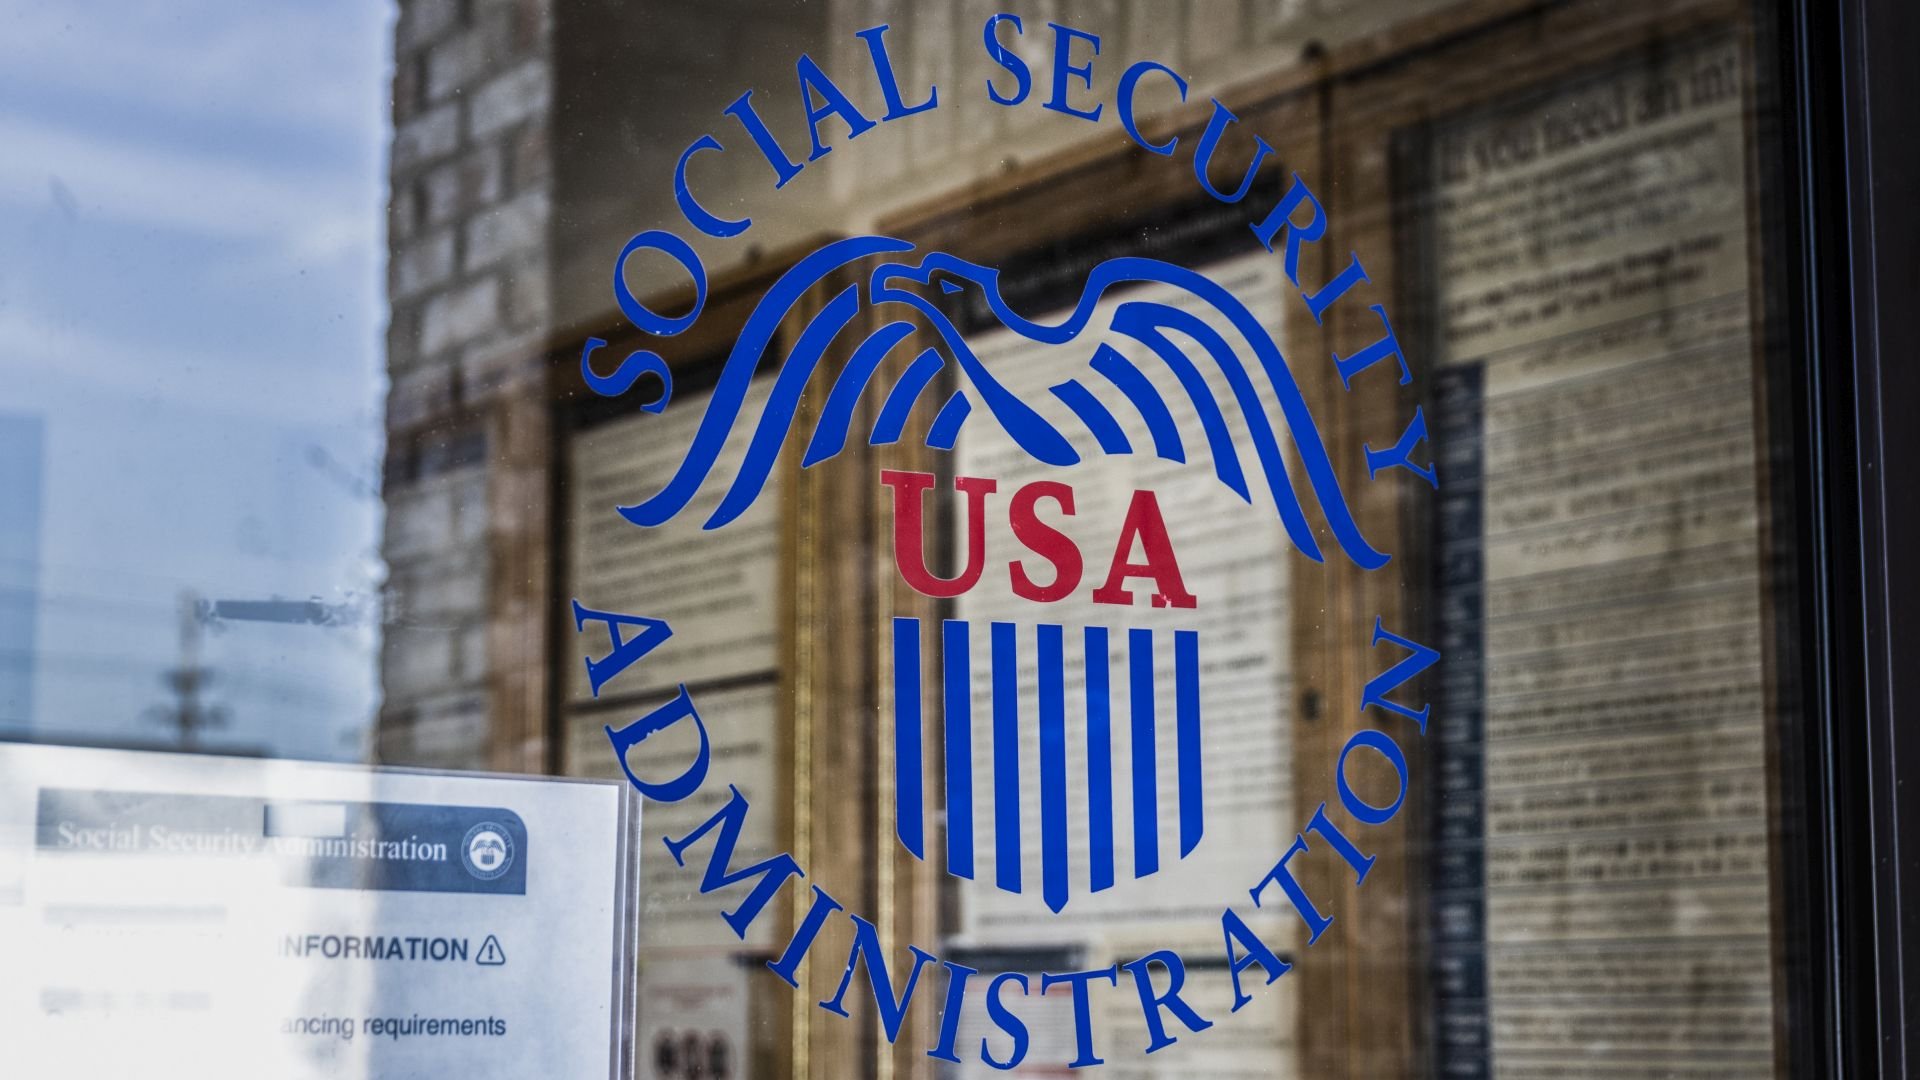 How To Strengthen the Social Security Administration - cover